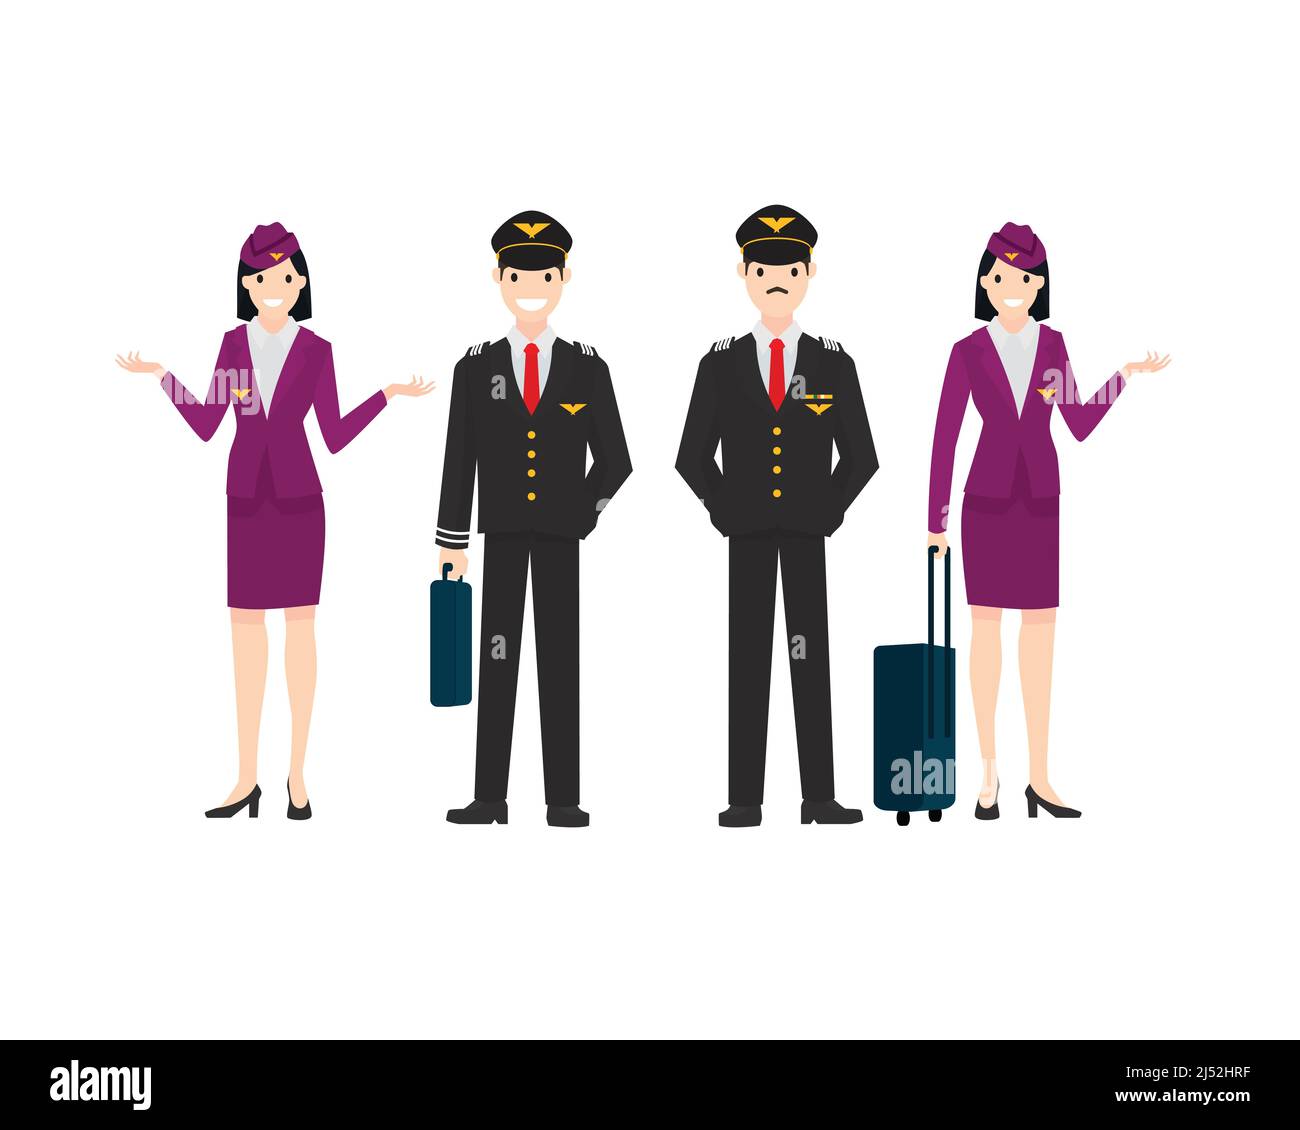 Pilots and Stewardesses Illustration Vector Stock Vector